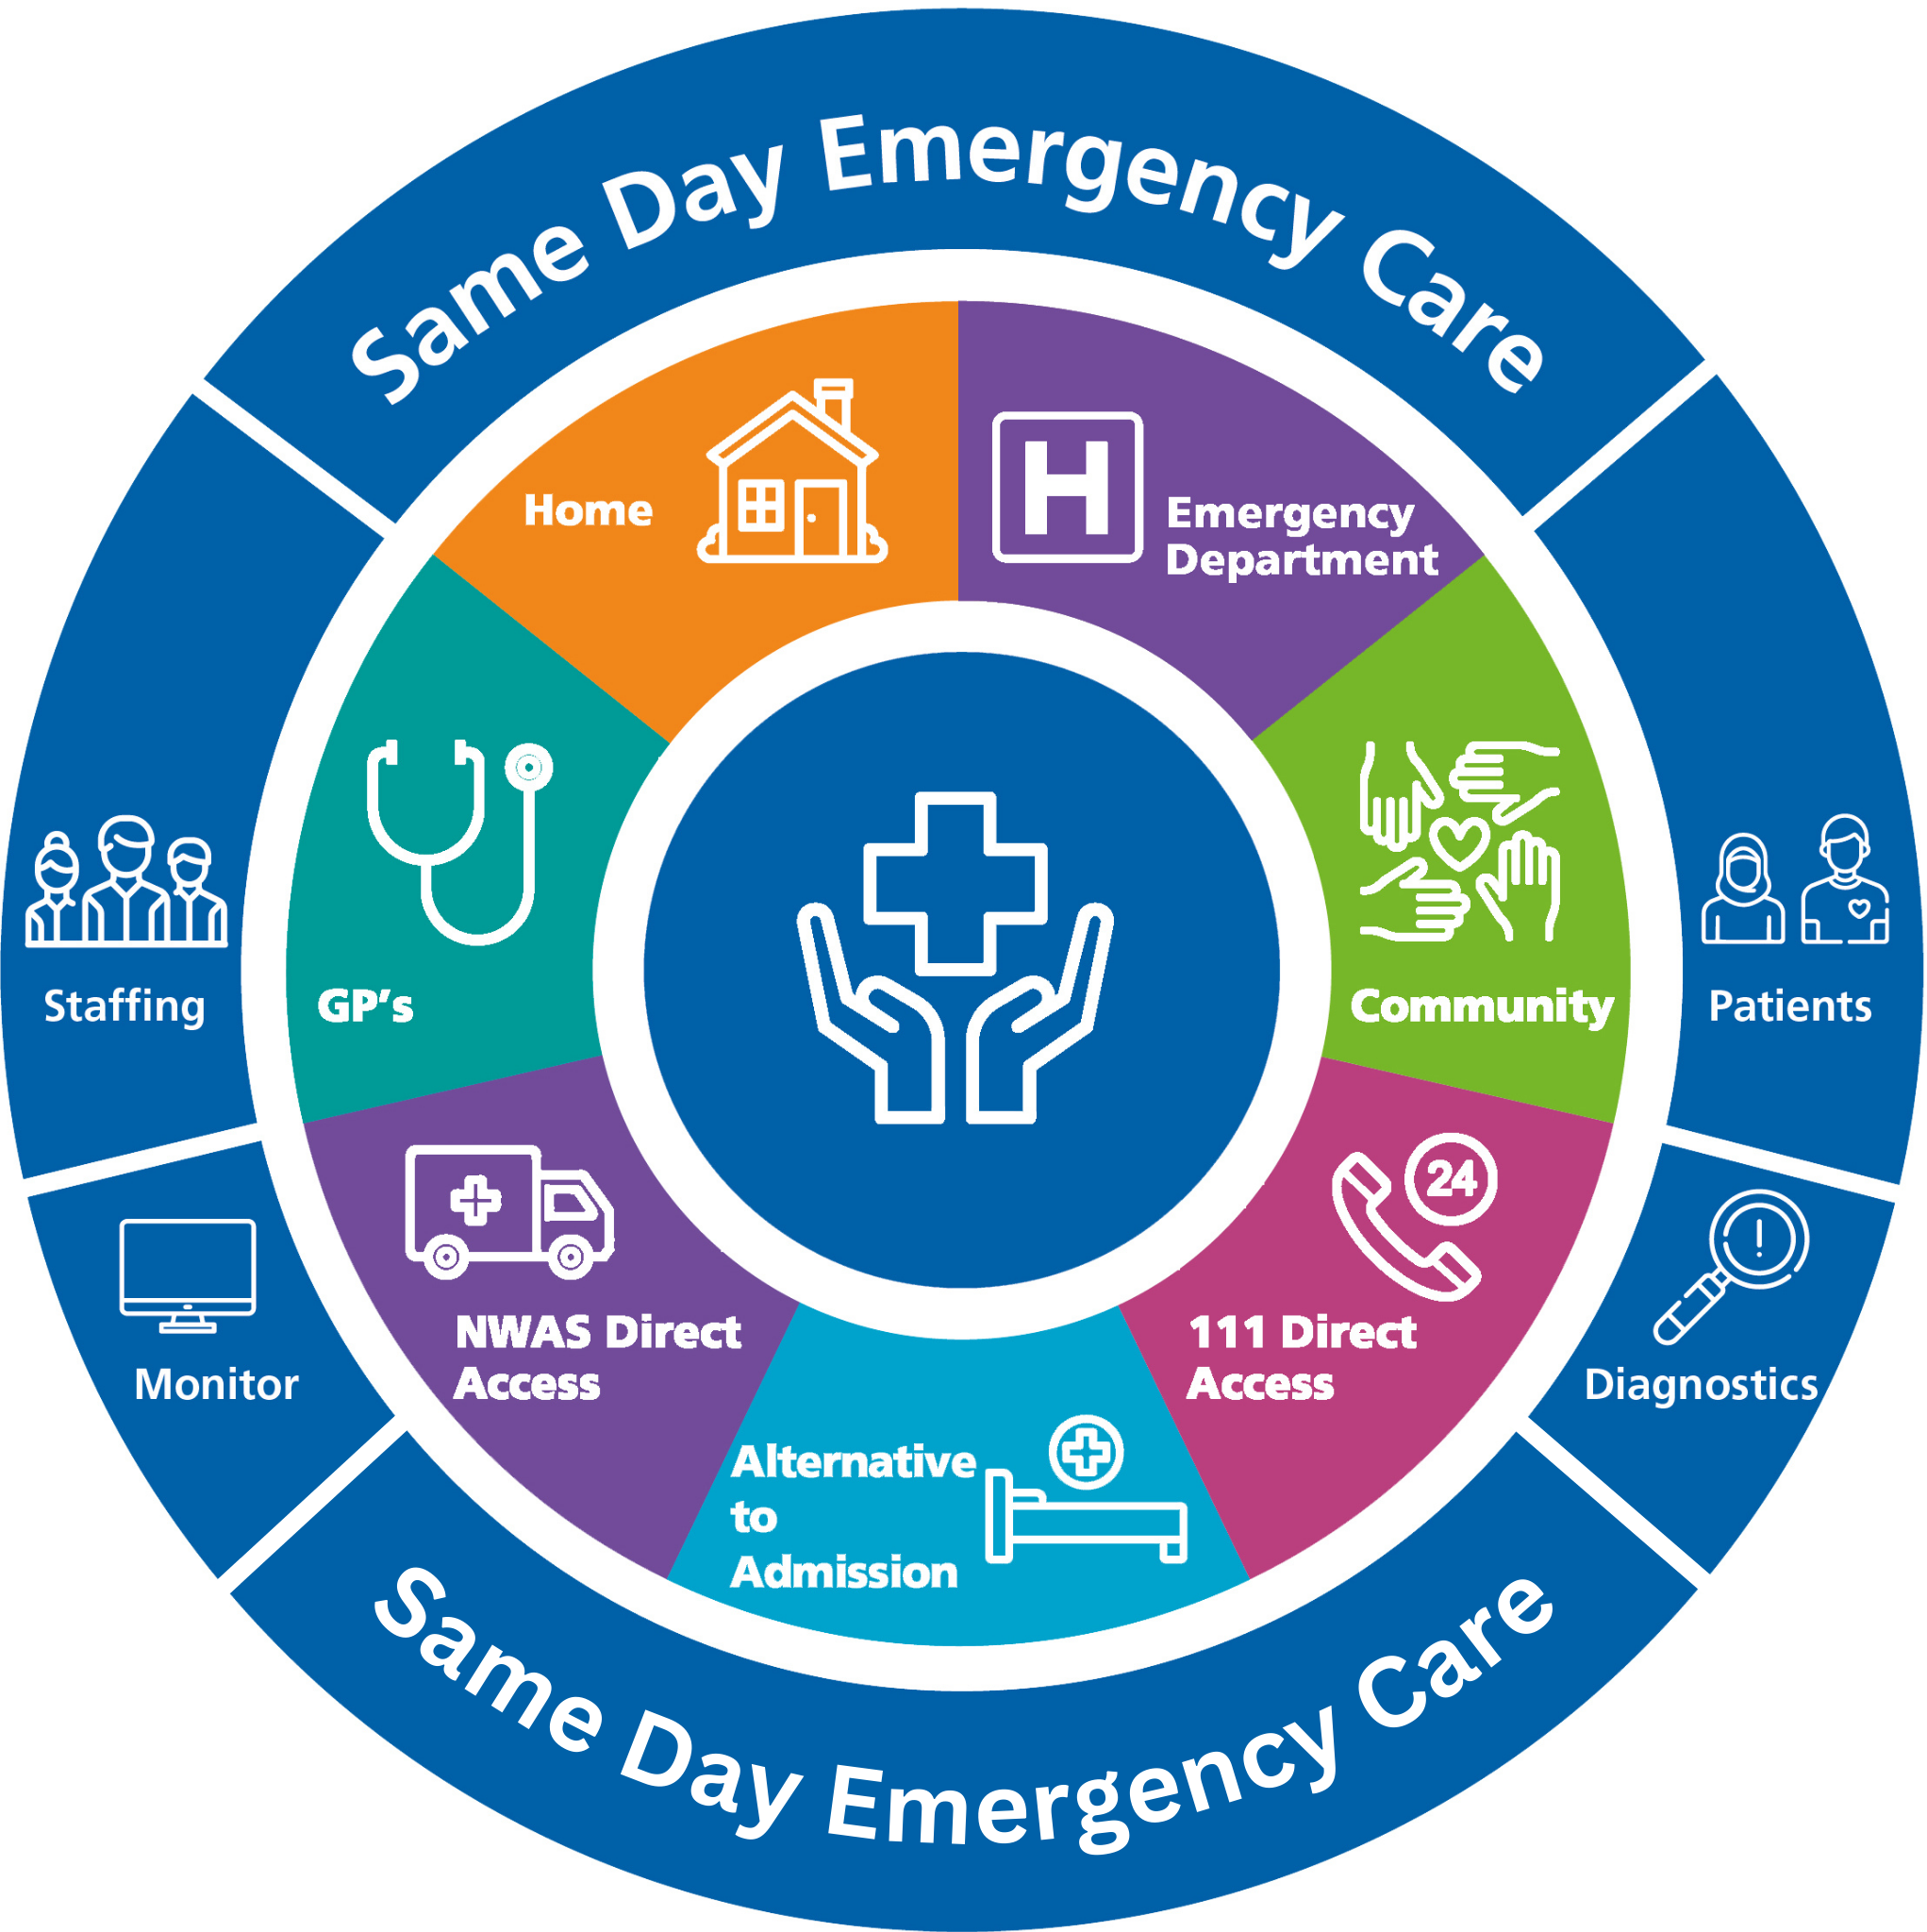 Logo of the Same Day Emergency Care service, showing that it involves care in the emergency department, community, from 111, from ambulance services, GPs, and at home. 